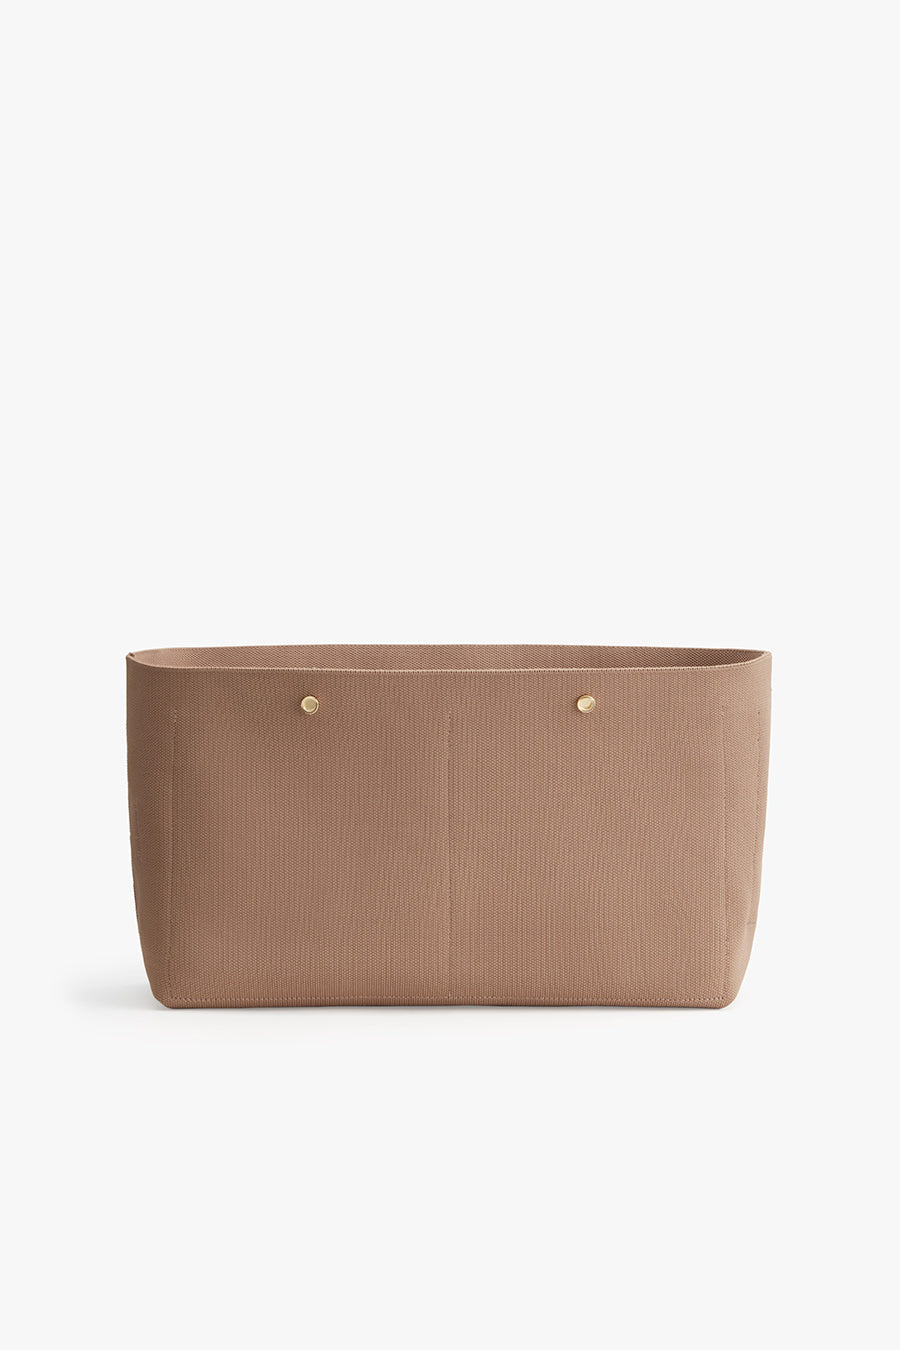 The Easy Tote – Cuyana